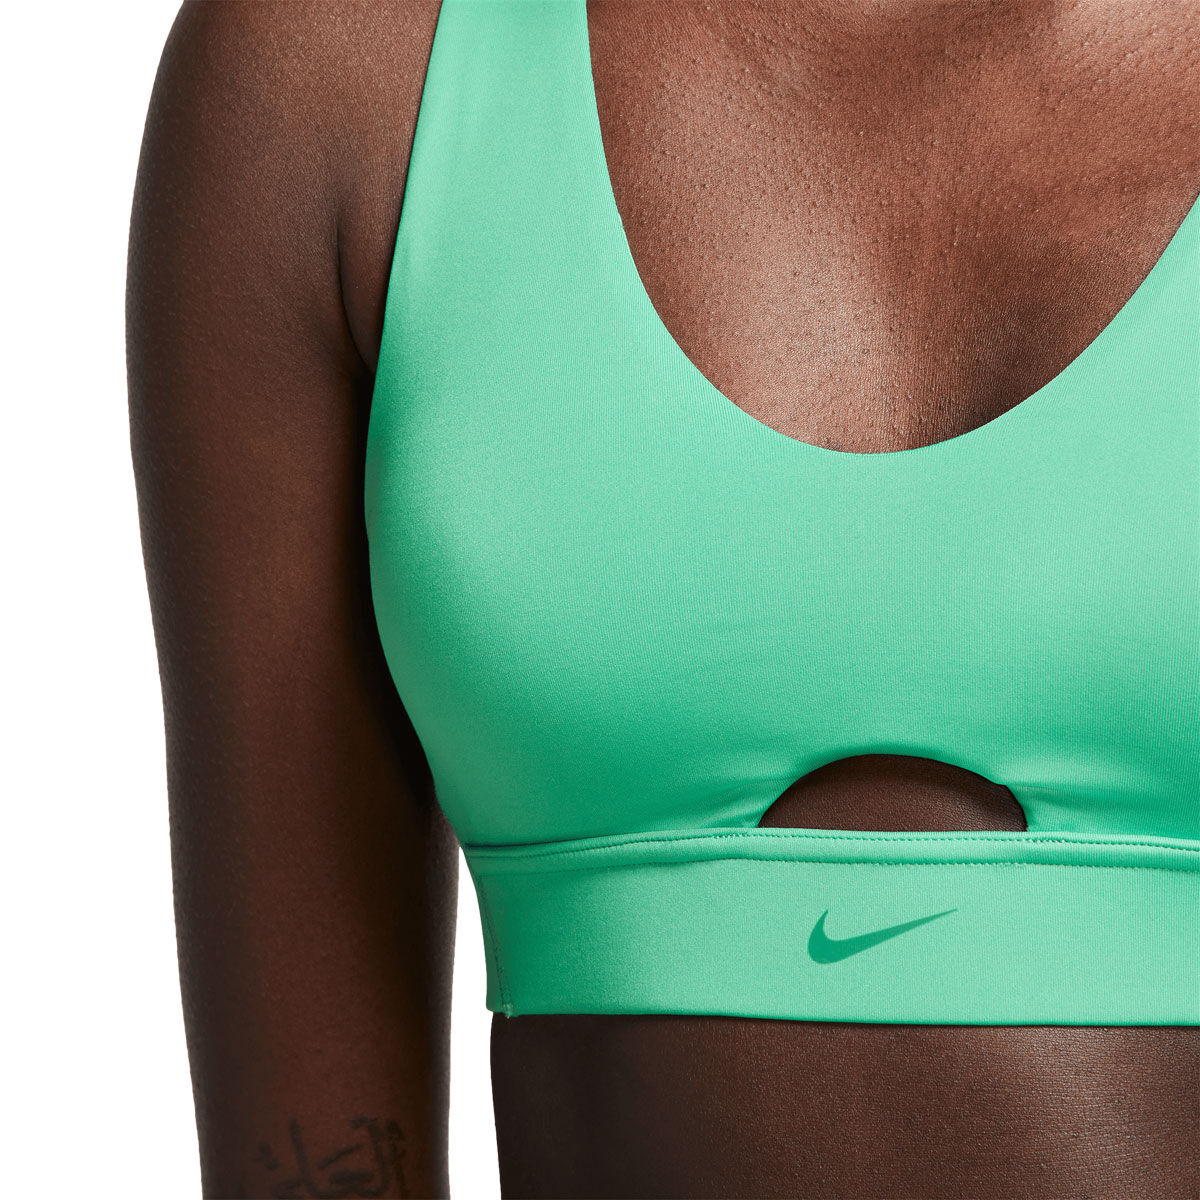 Indy Plunge Cutout Medium-Support Padded Sports Bra by Nike